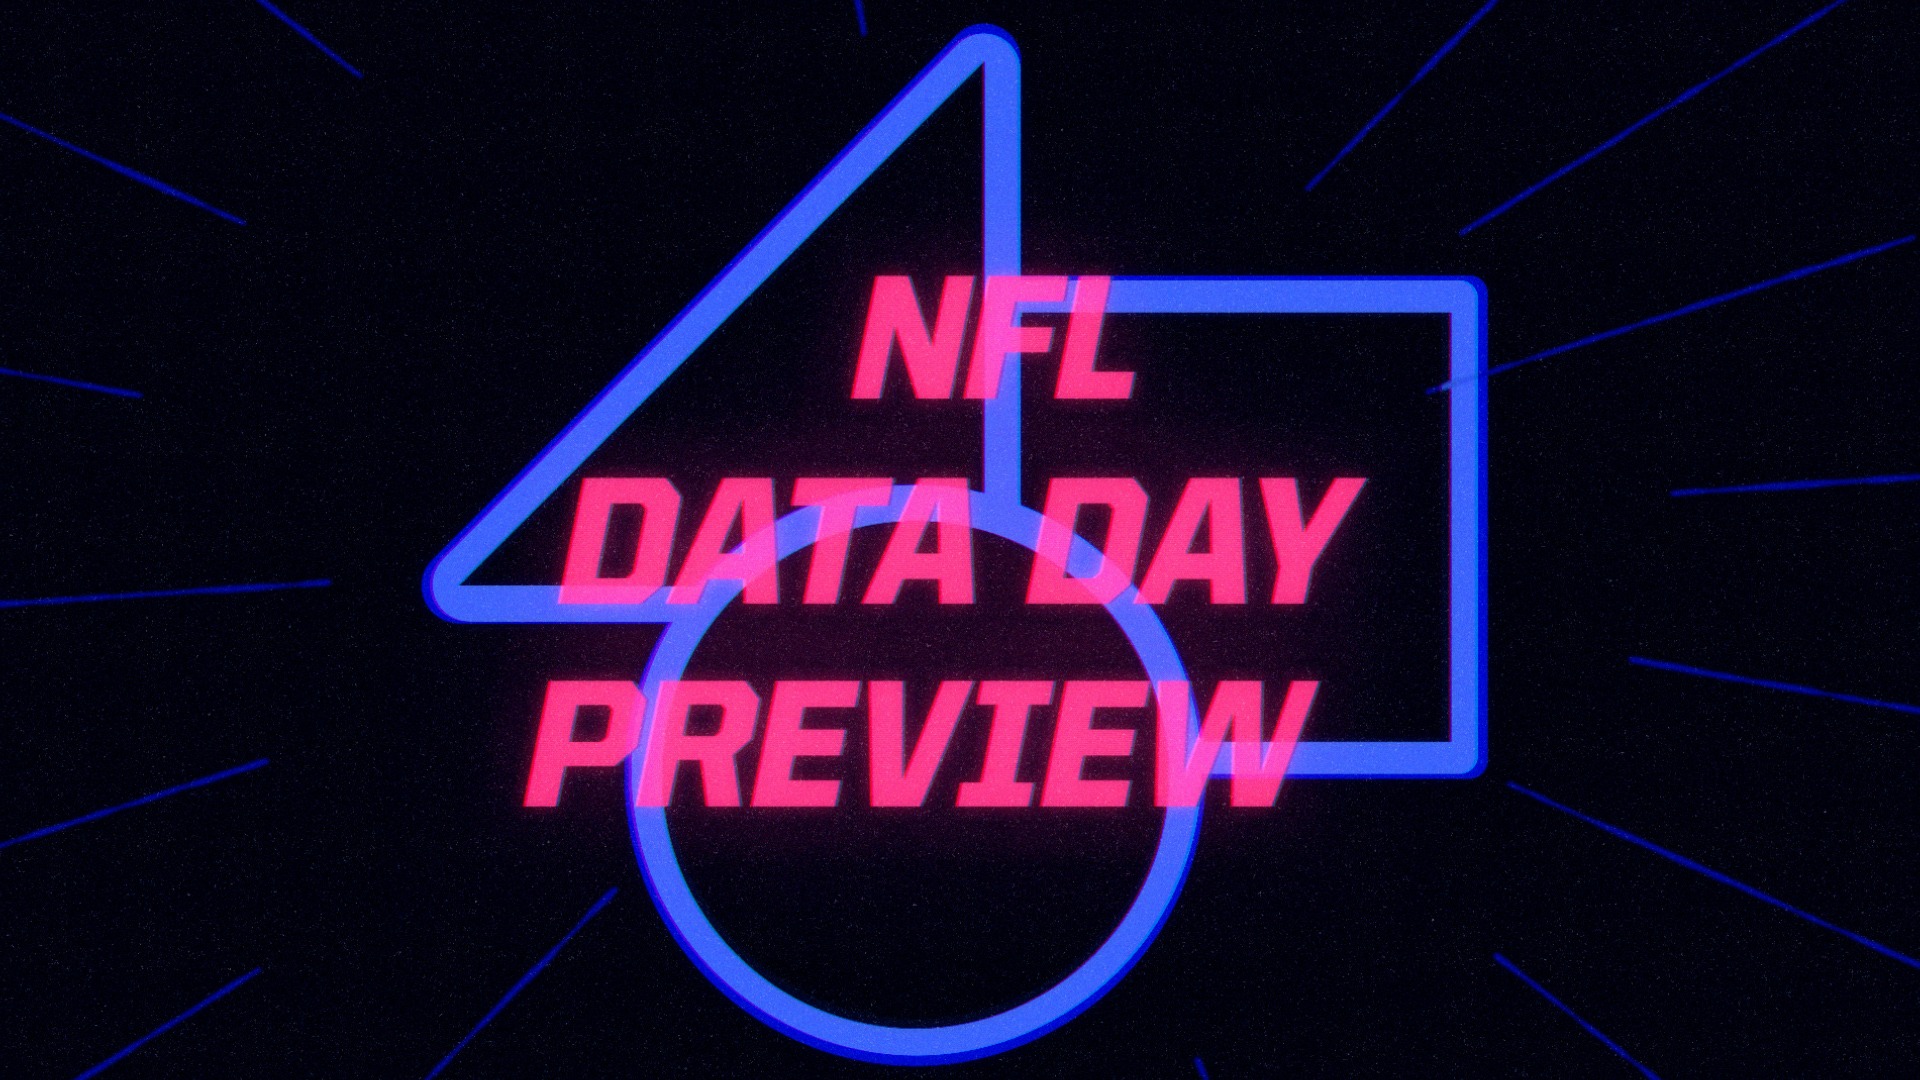 NFL Week 7 Preview | The Data Day